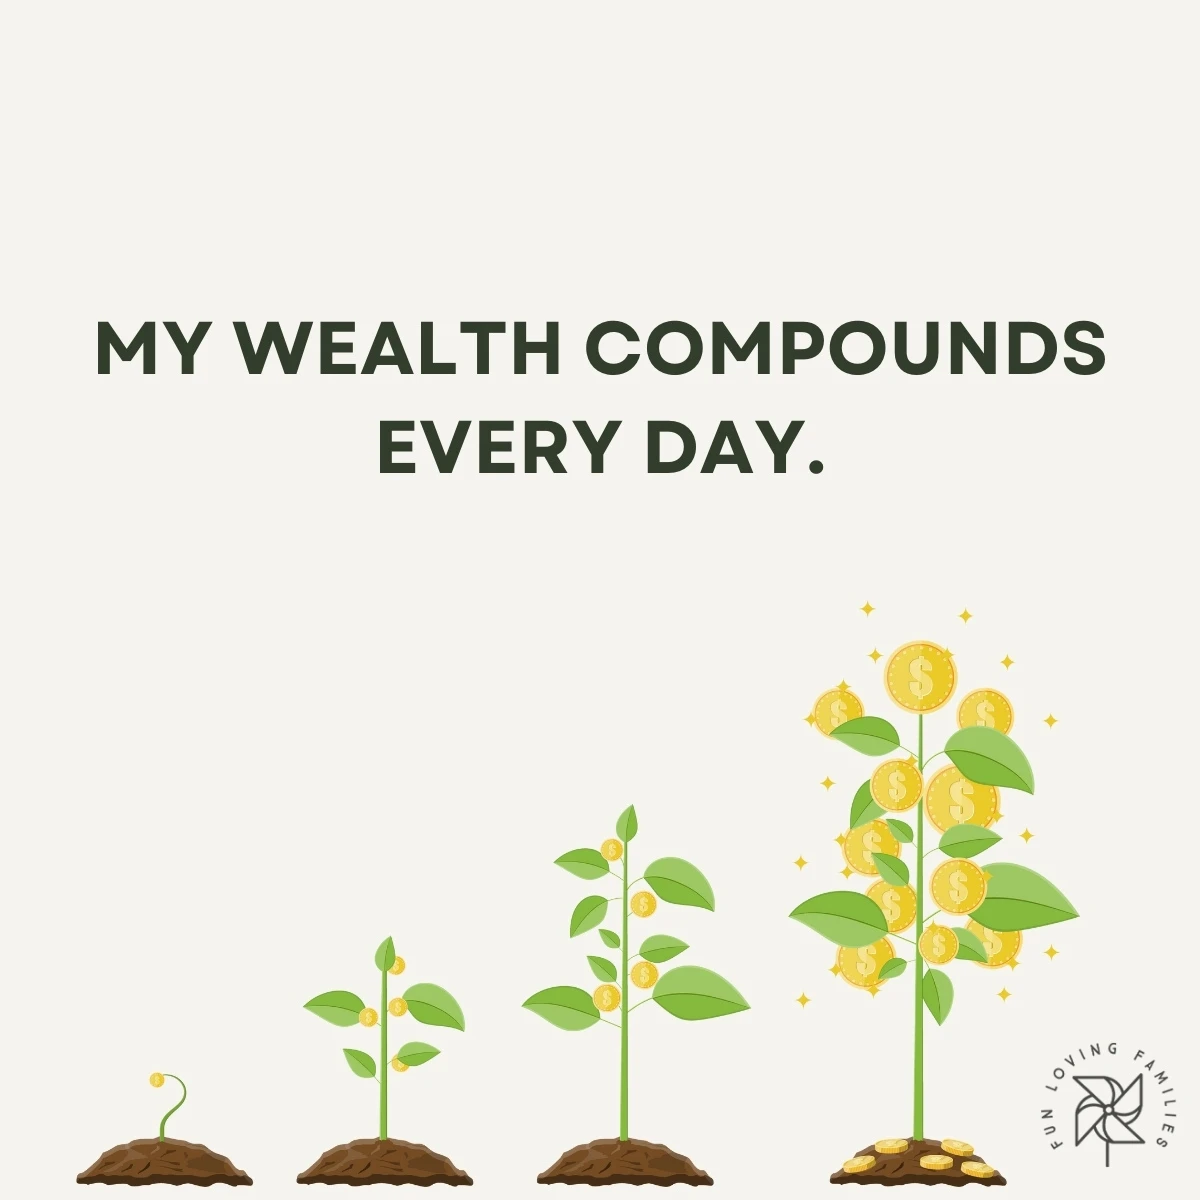 My wealth compounds every day affirmation